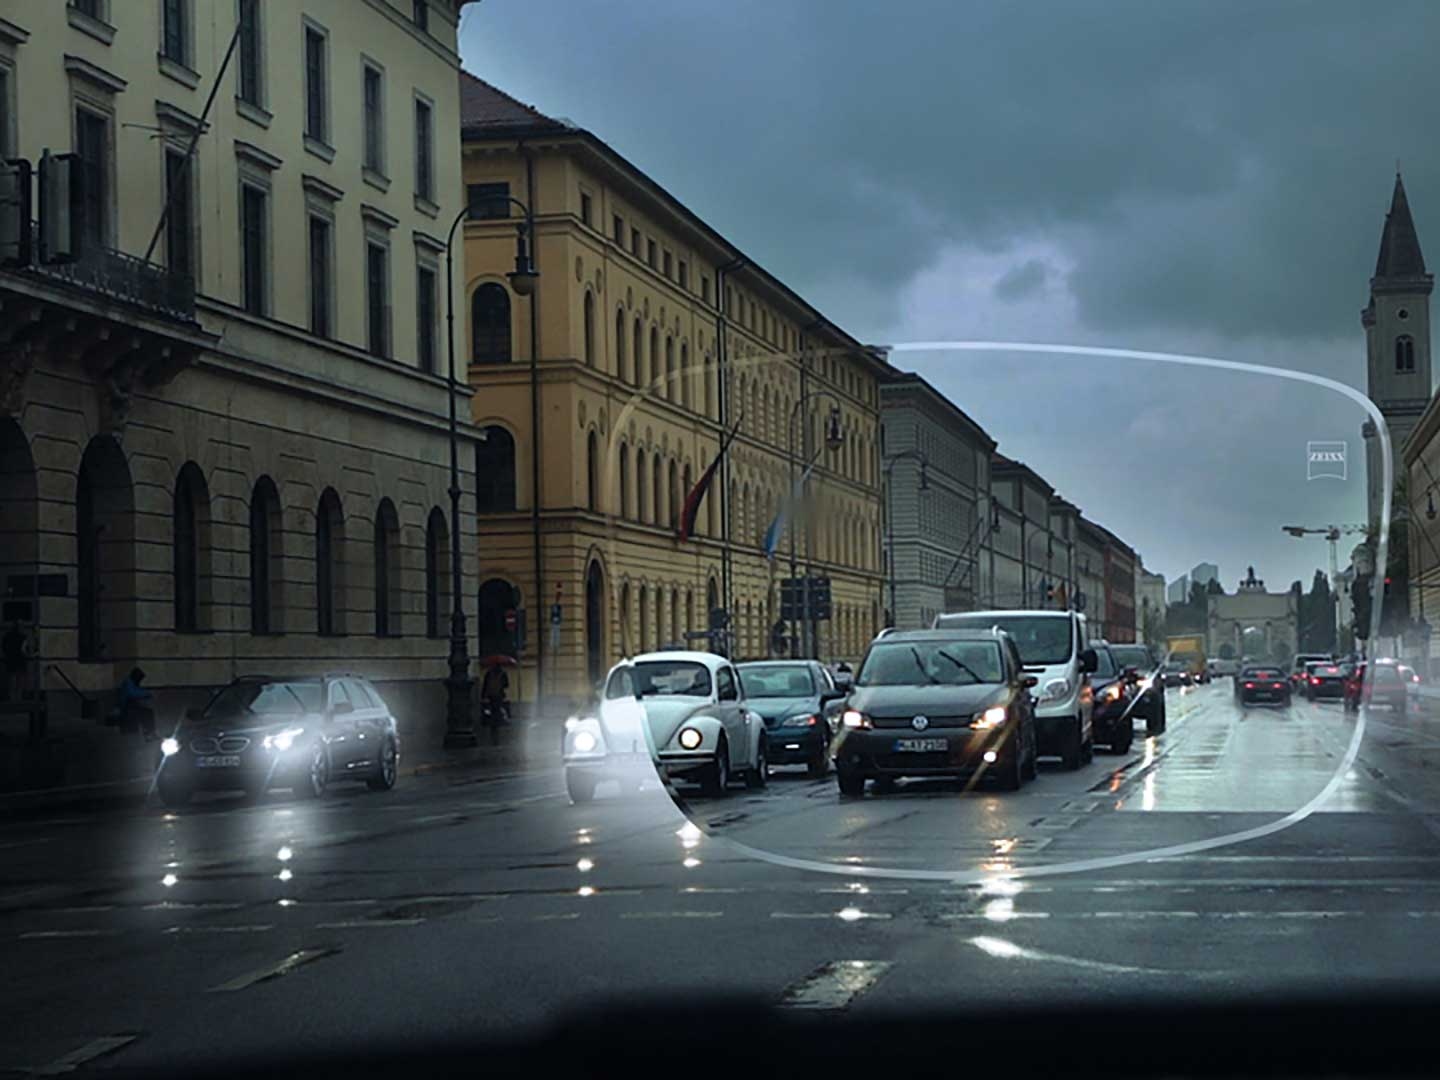 The image shows poor visibility in low-light conditions on a street. The point of view is the interior of a car as seen through a spectacle lens. 